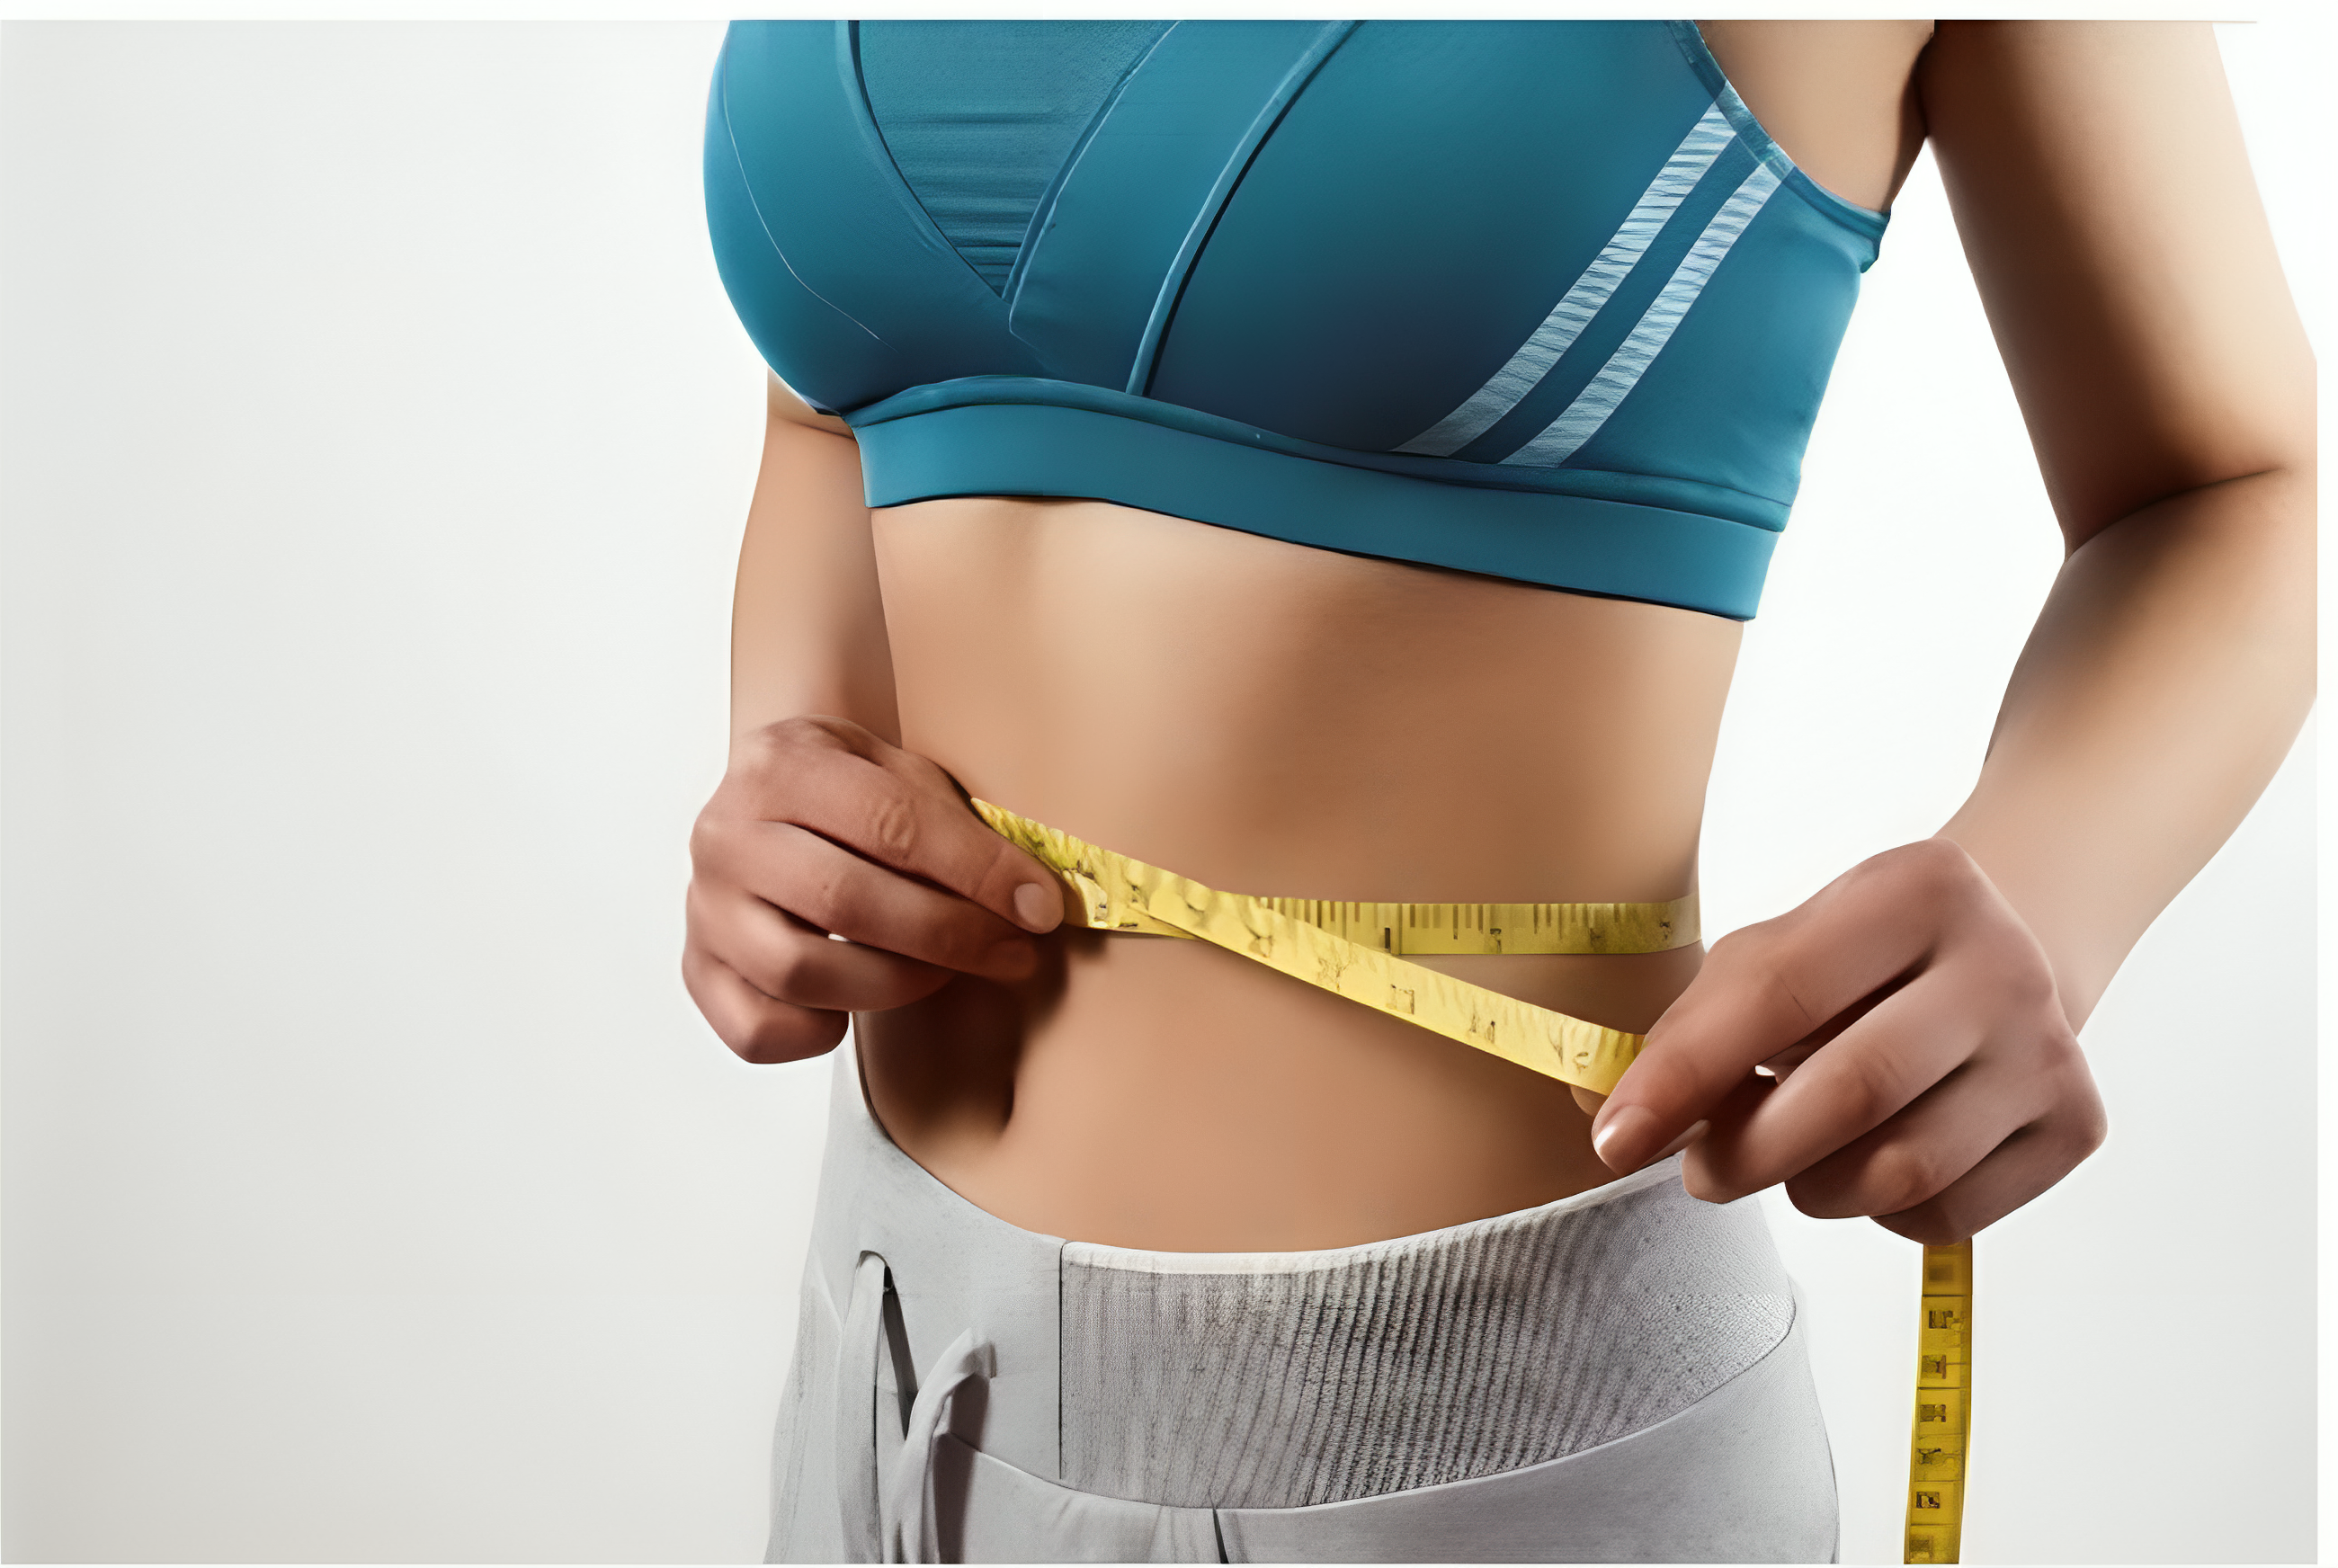 Non surgical weight loss treatment